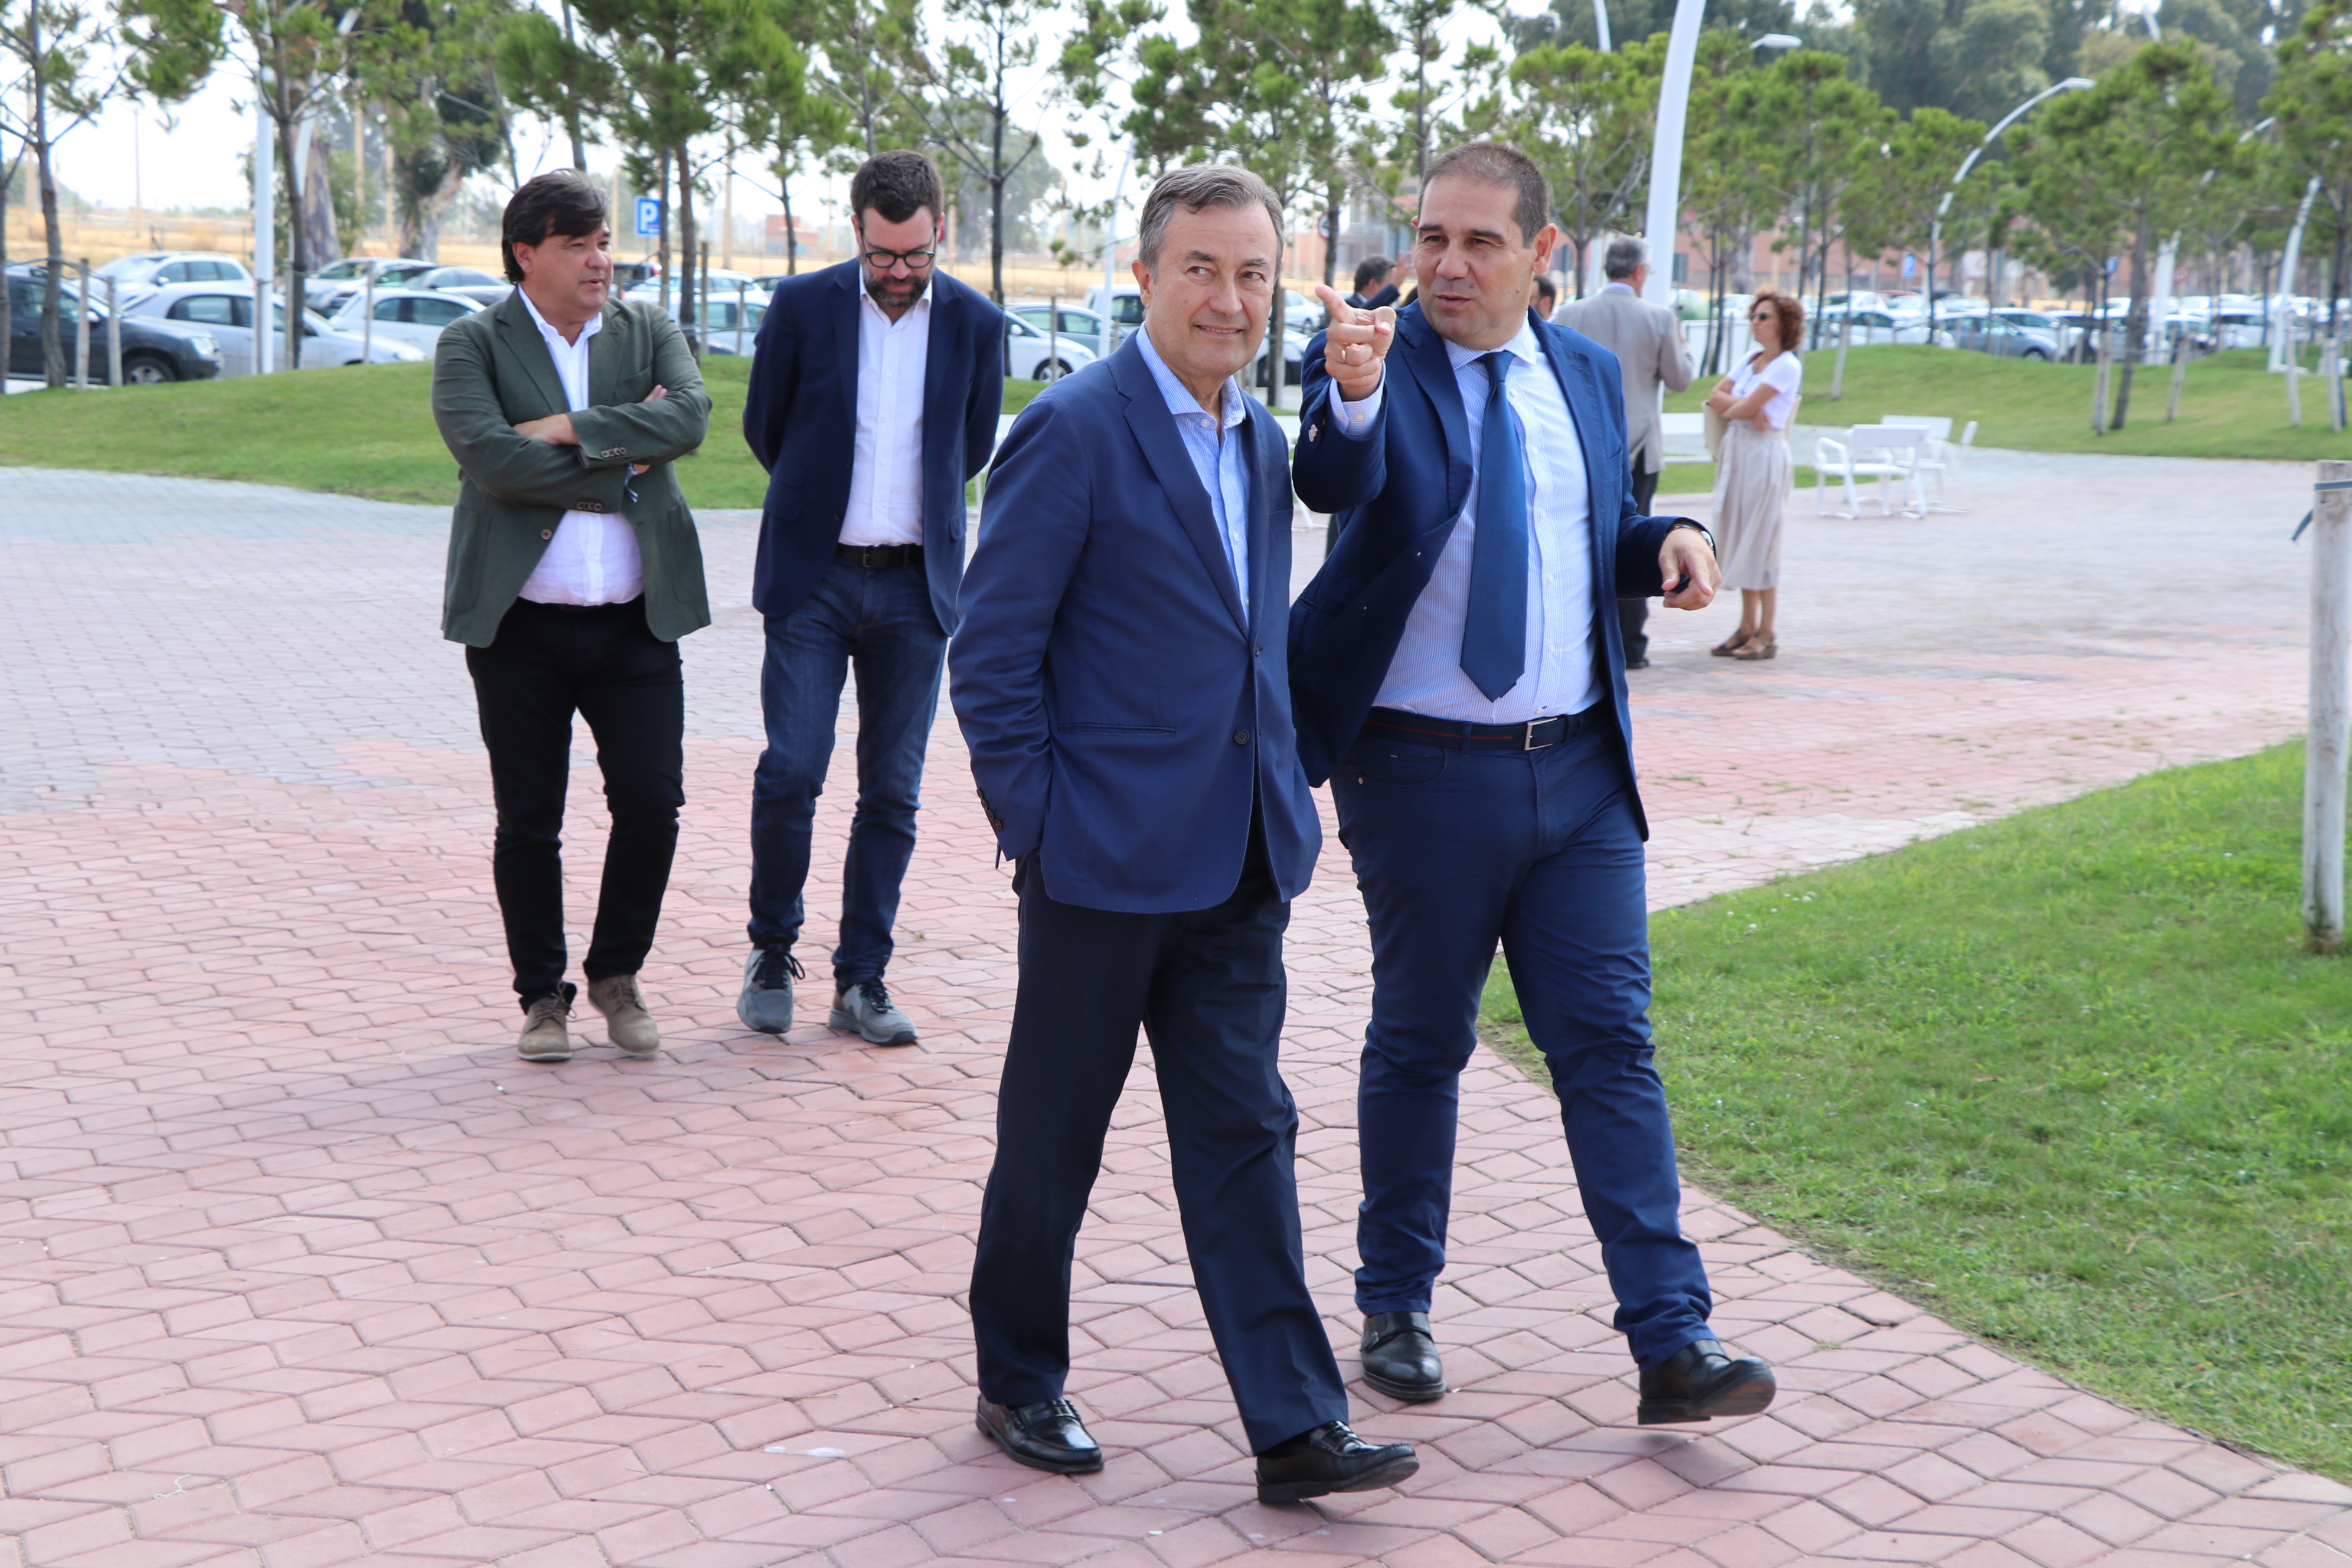 THE PRESIDENT OF THE PORT AUTHORITY OF THE BALEARIC ISLANDS AND THE MAYOR OF PALMA TOUR THE RIA DE HUELVA PROMENADE AS A MODEL TO BE APPLIED IN THE CAPITAL OF MALLORCA